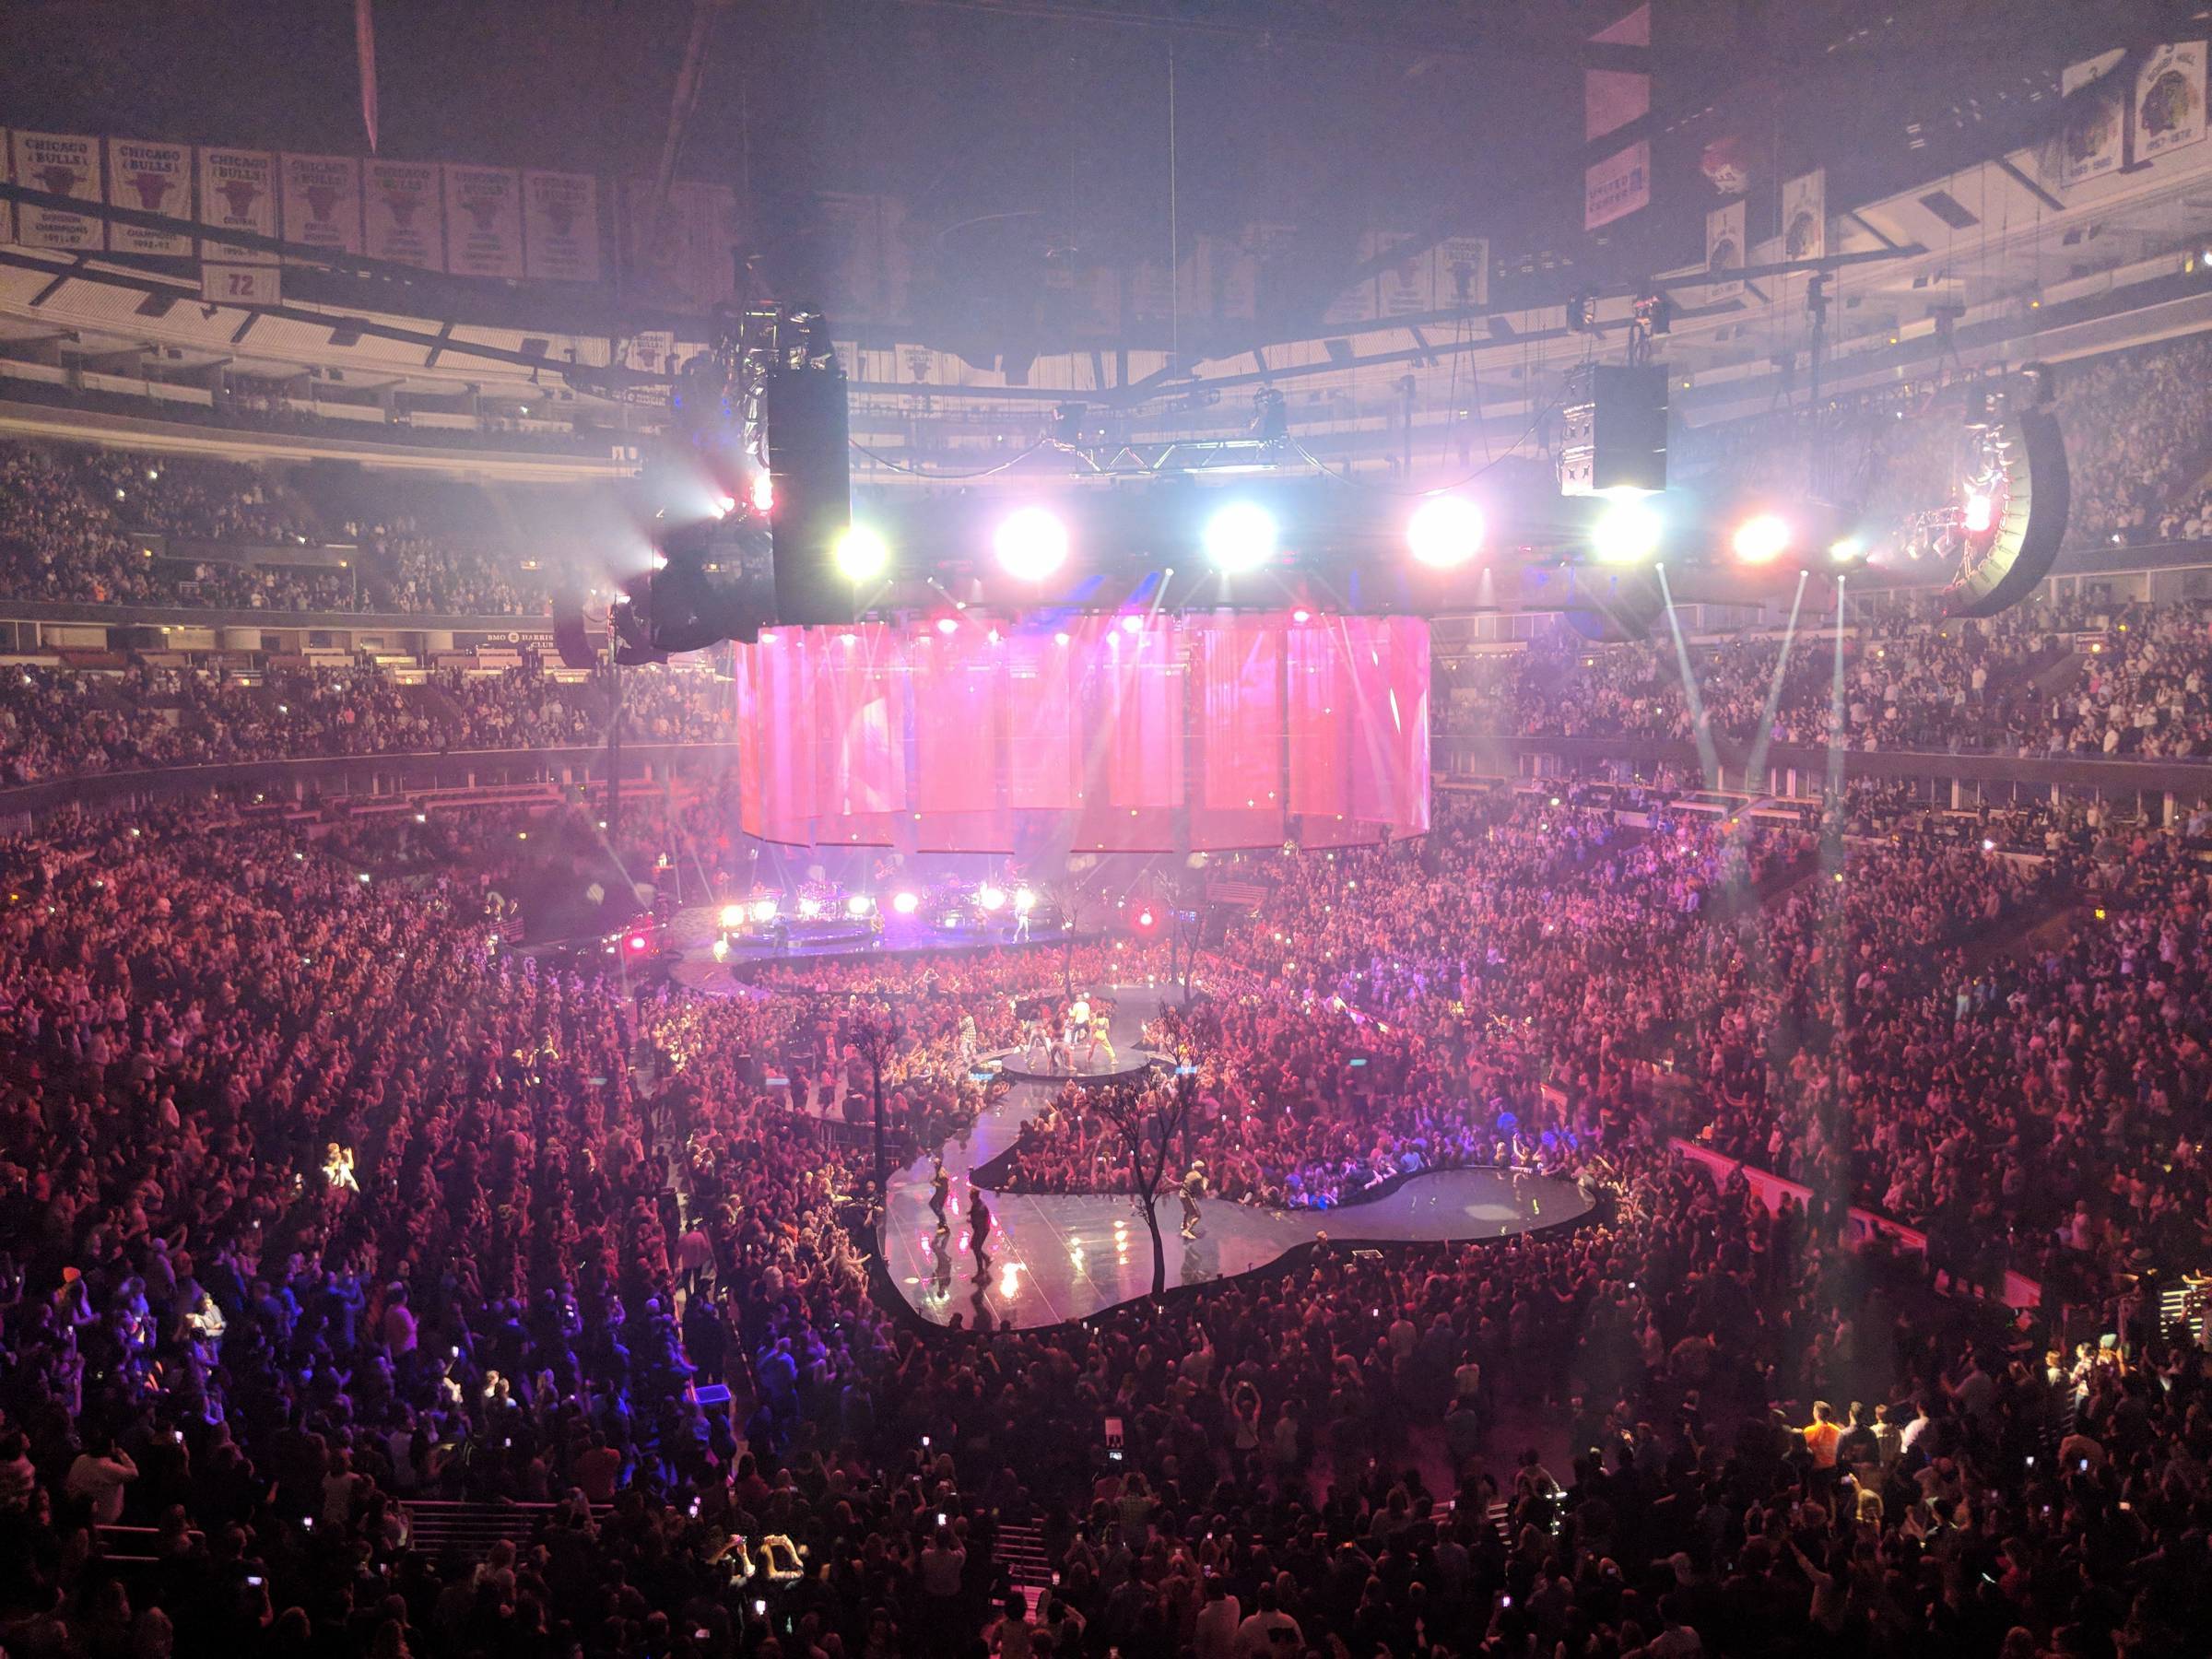 justin timberlake sold out concert at the united center